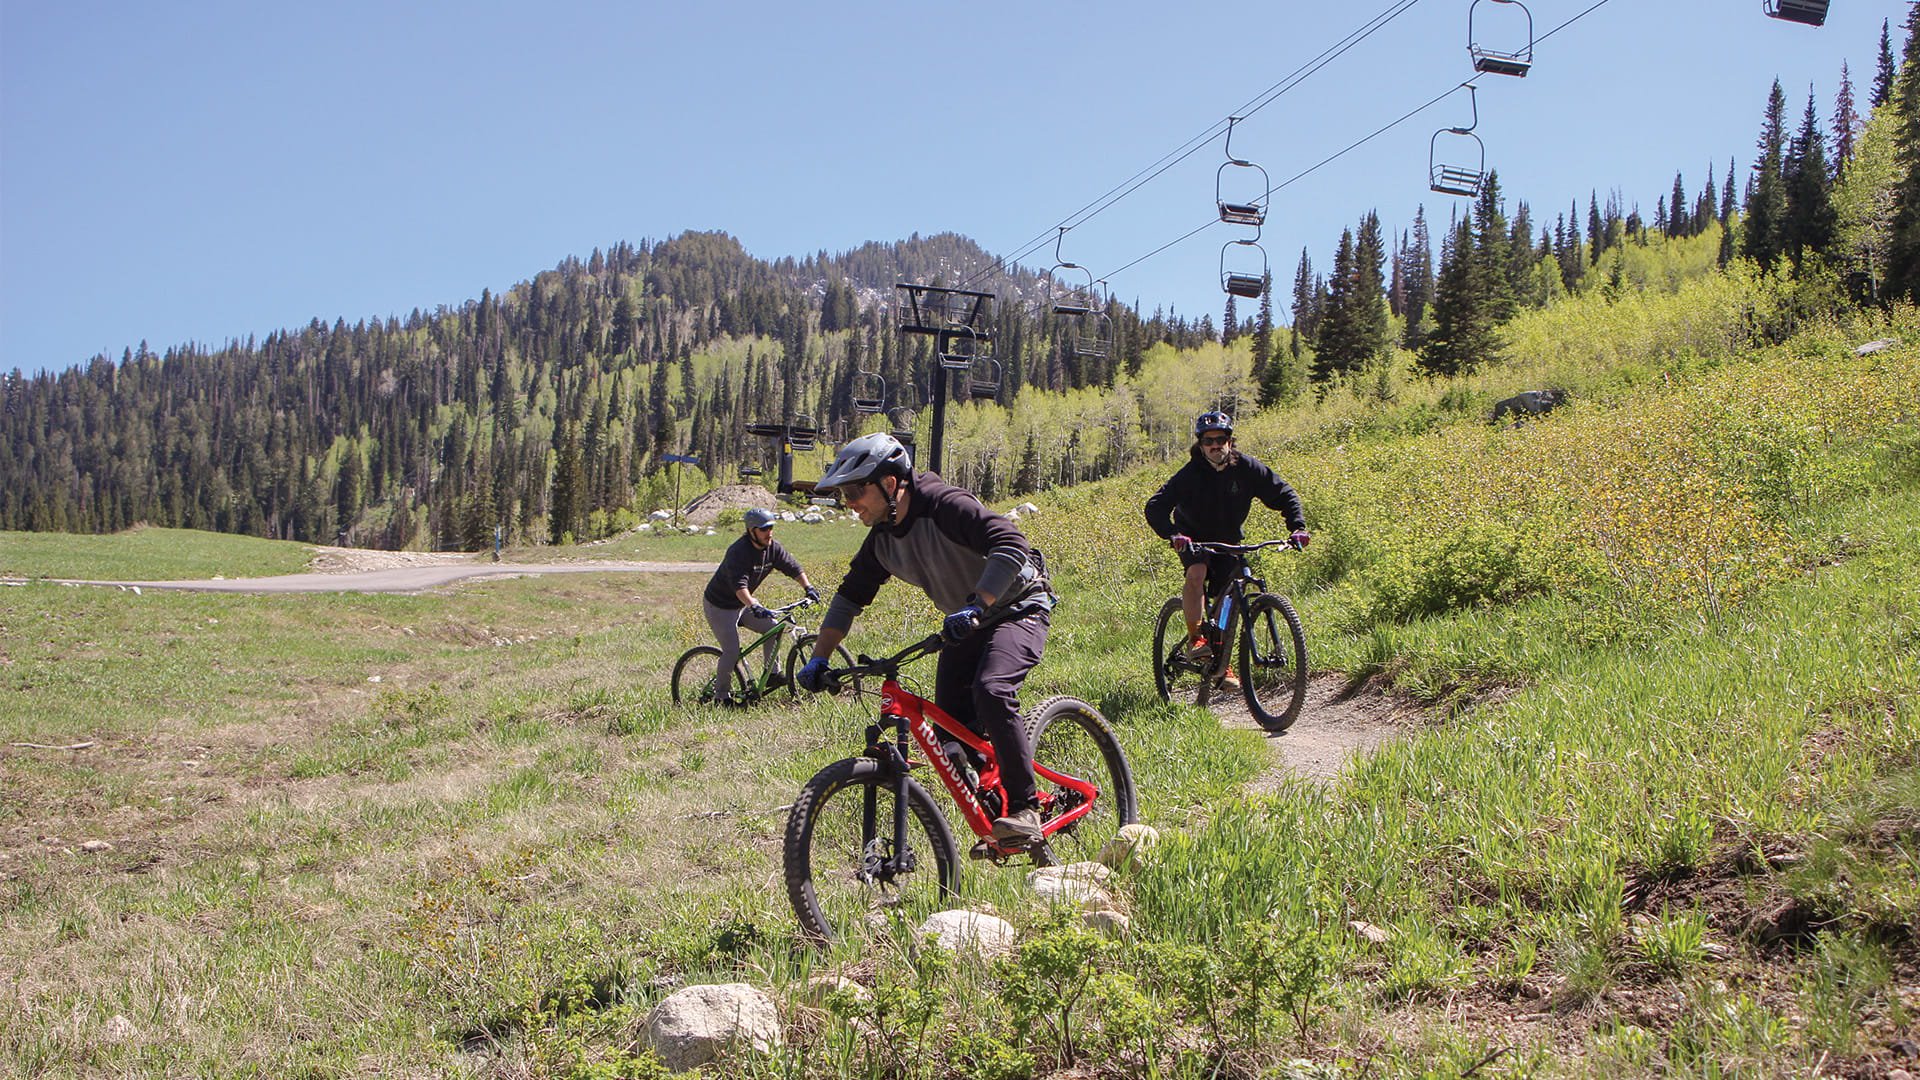 Three mountain bike lesson takers turning on a bike trail at Solitude